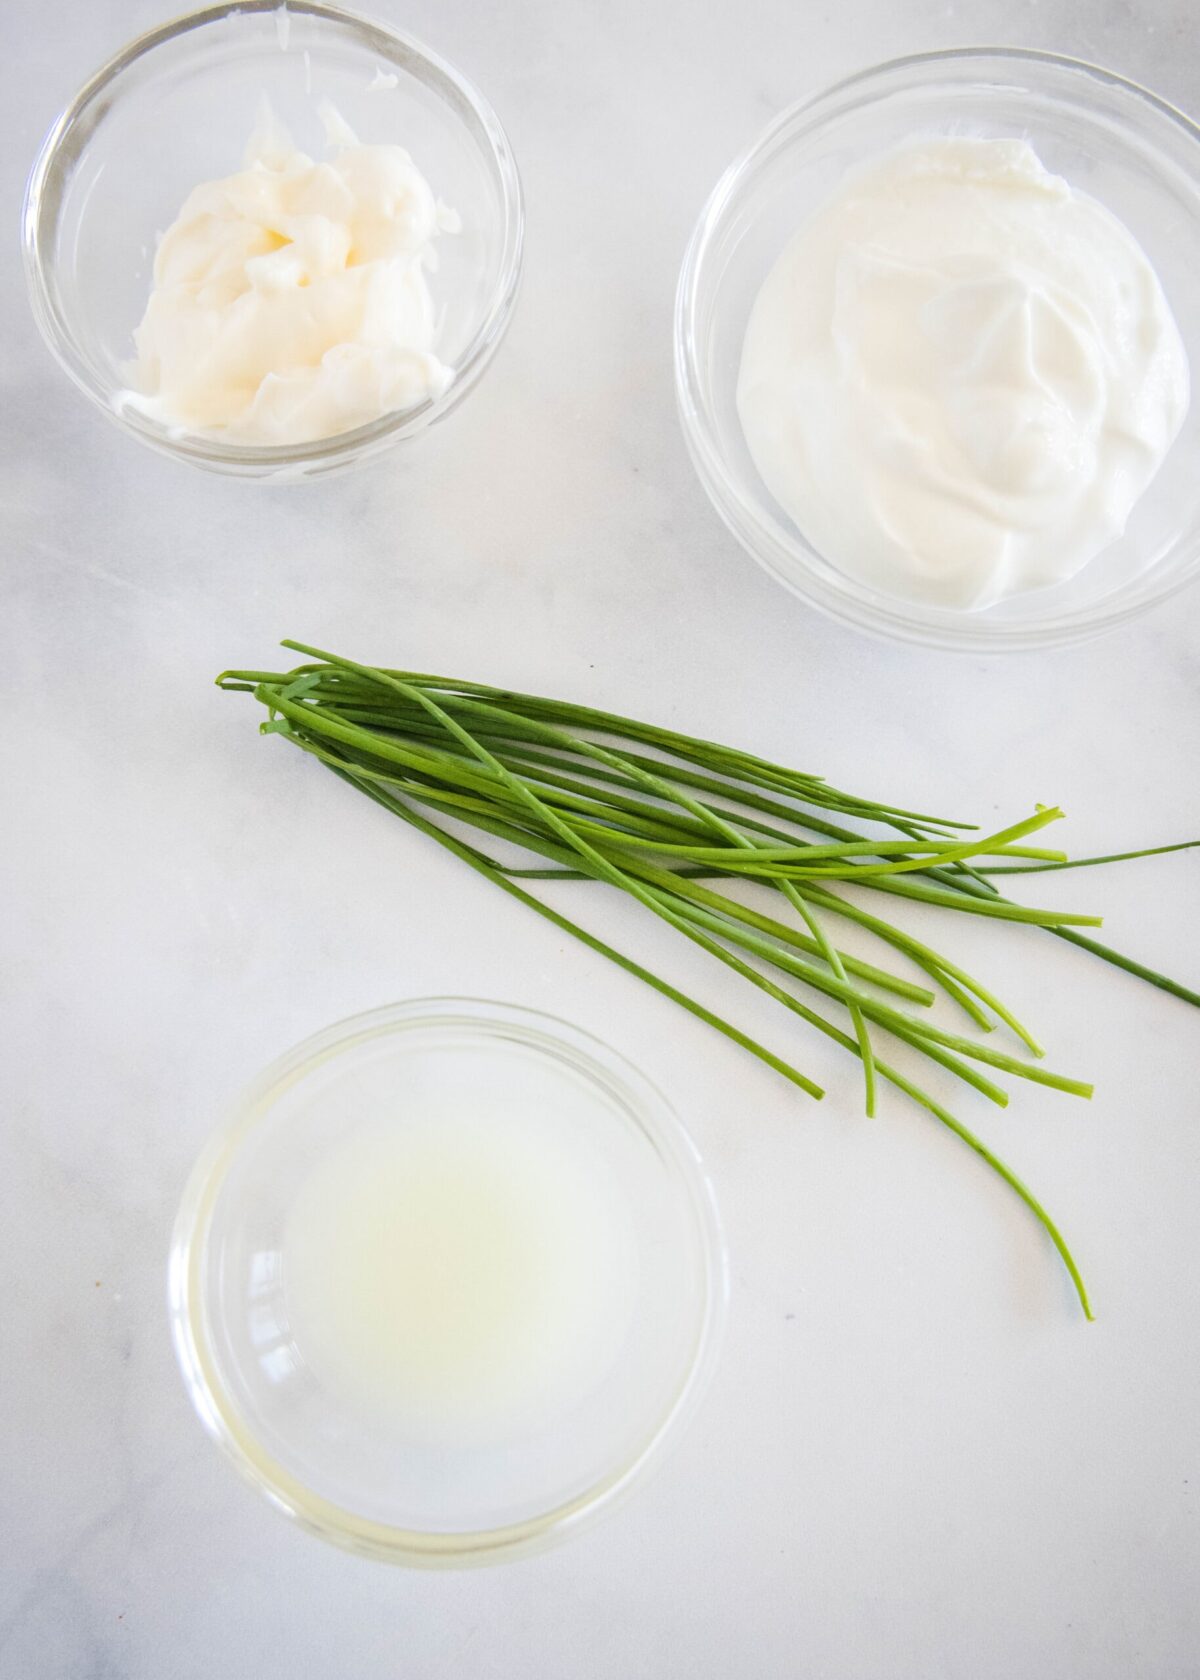 Overhead view of the ingredients needed for a dipping sauce: a handful of chives, a bowl of lemon juice, a bowl of mayo, and a bowl of Greek yogurt